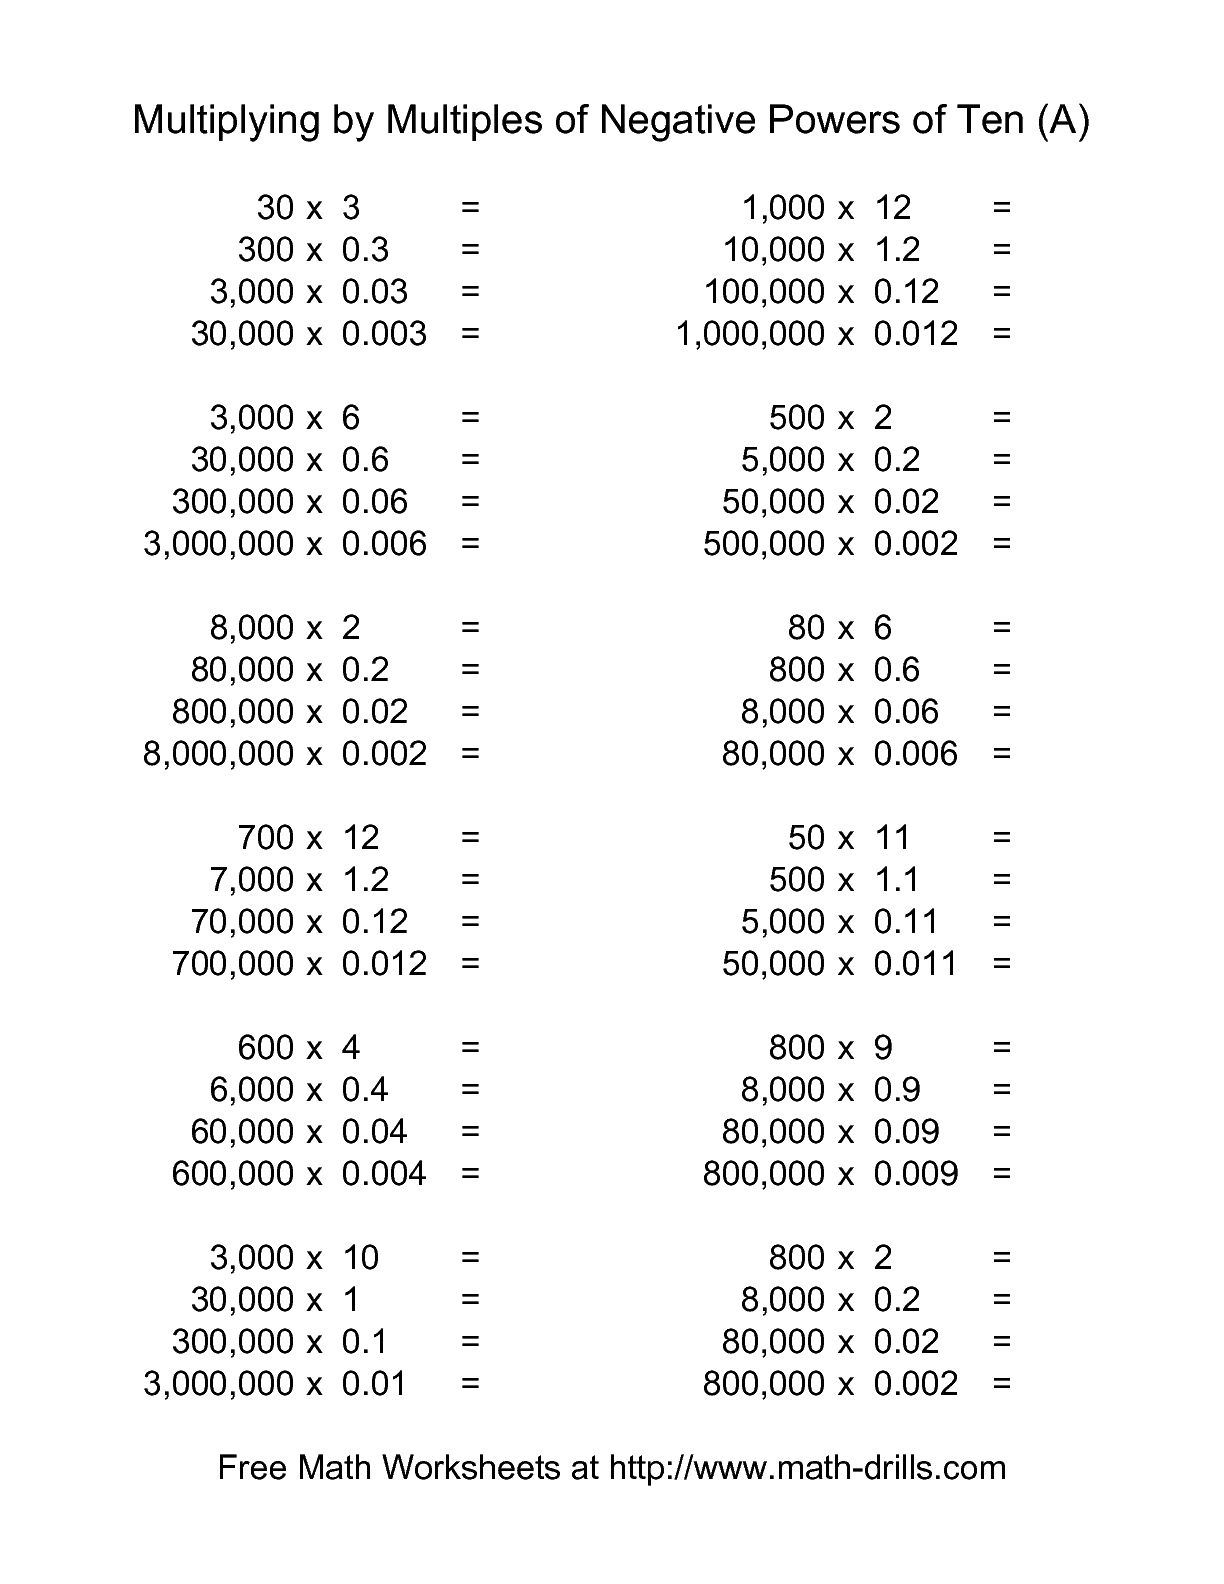 multiply-and-divide-by-powers-of-10-math-worksheets-splashlearn